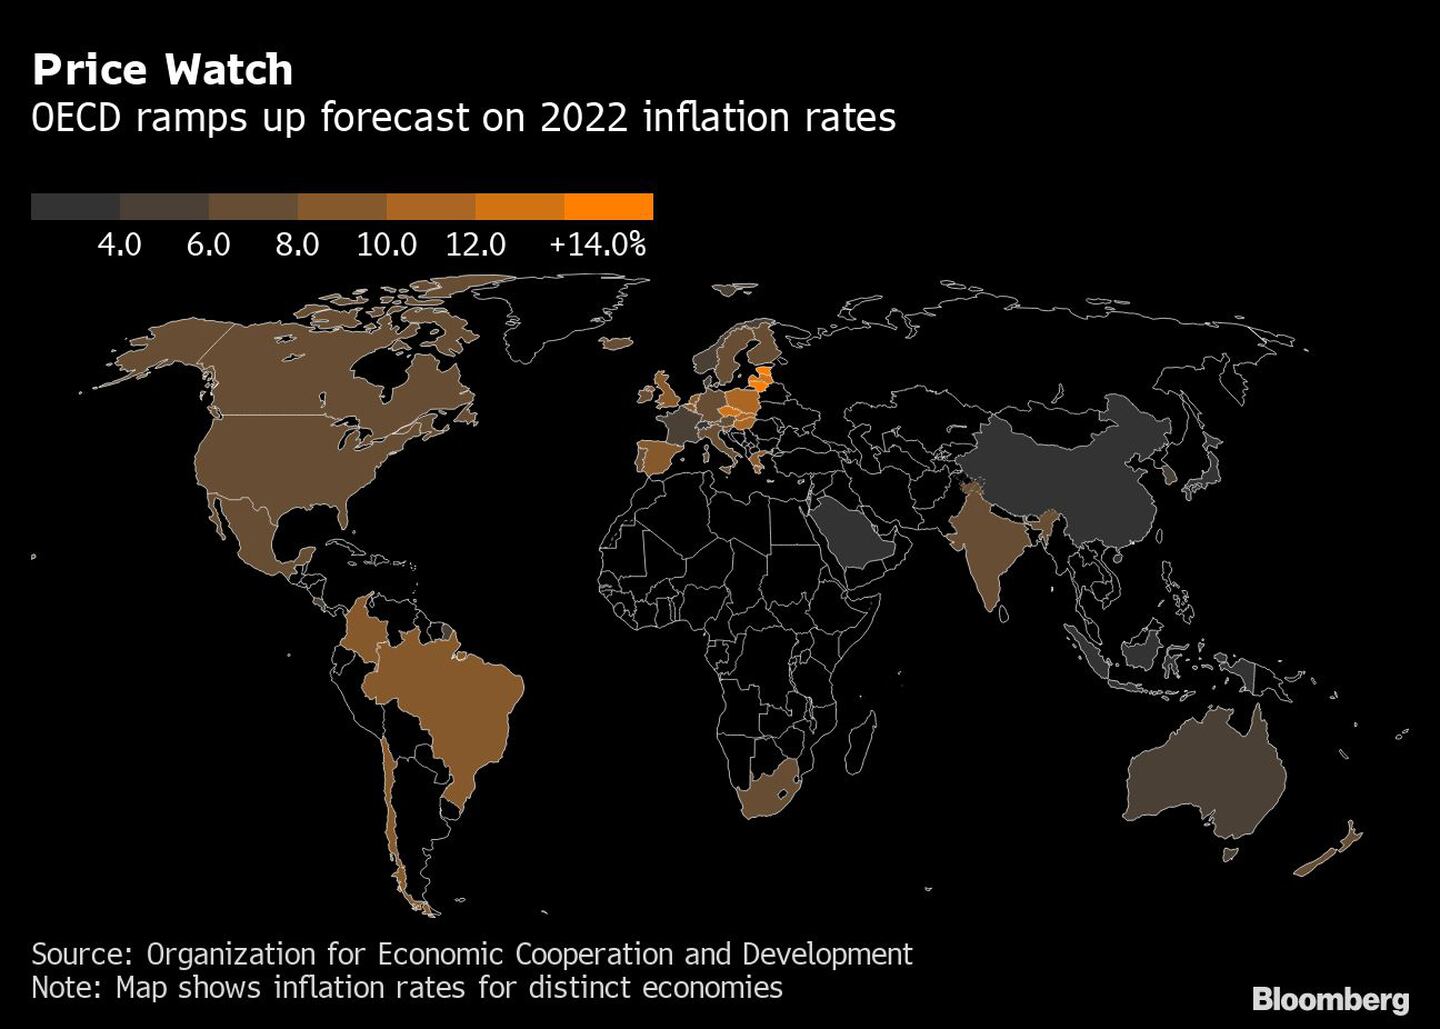 Price Watch | OECD ramps up forecast on 2022 inflation ratesdfd